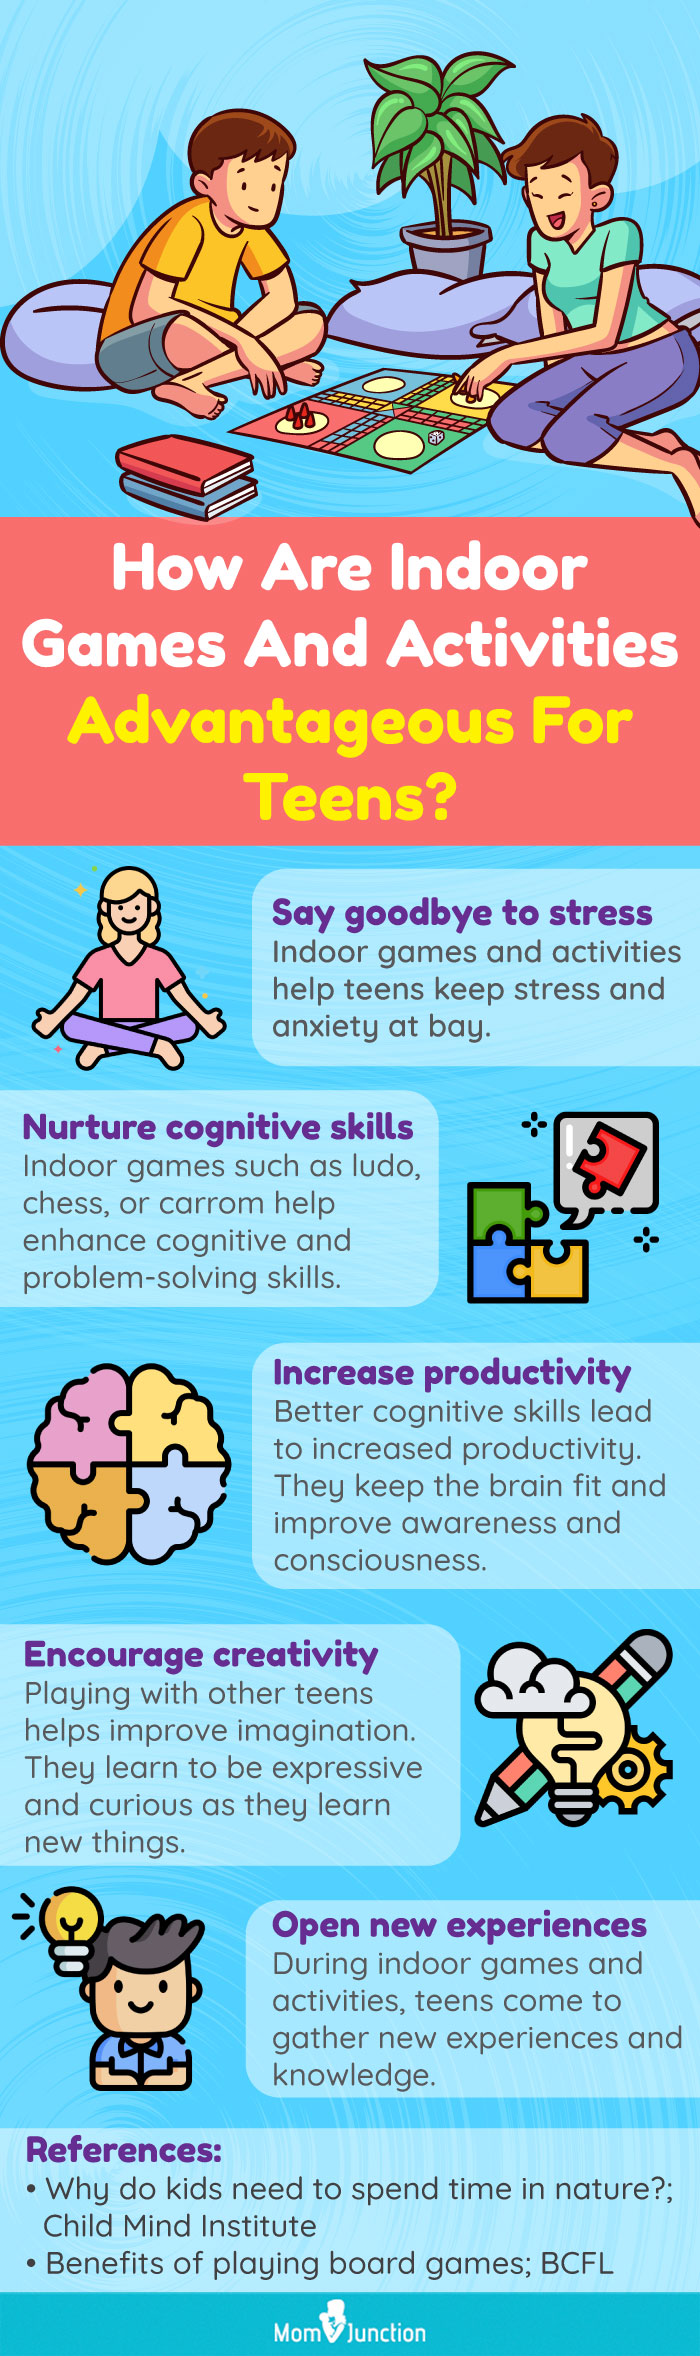 20 Fun Games to Play When Bored